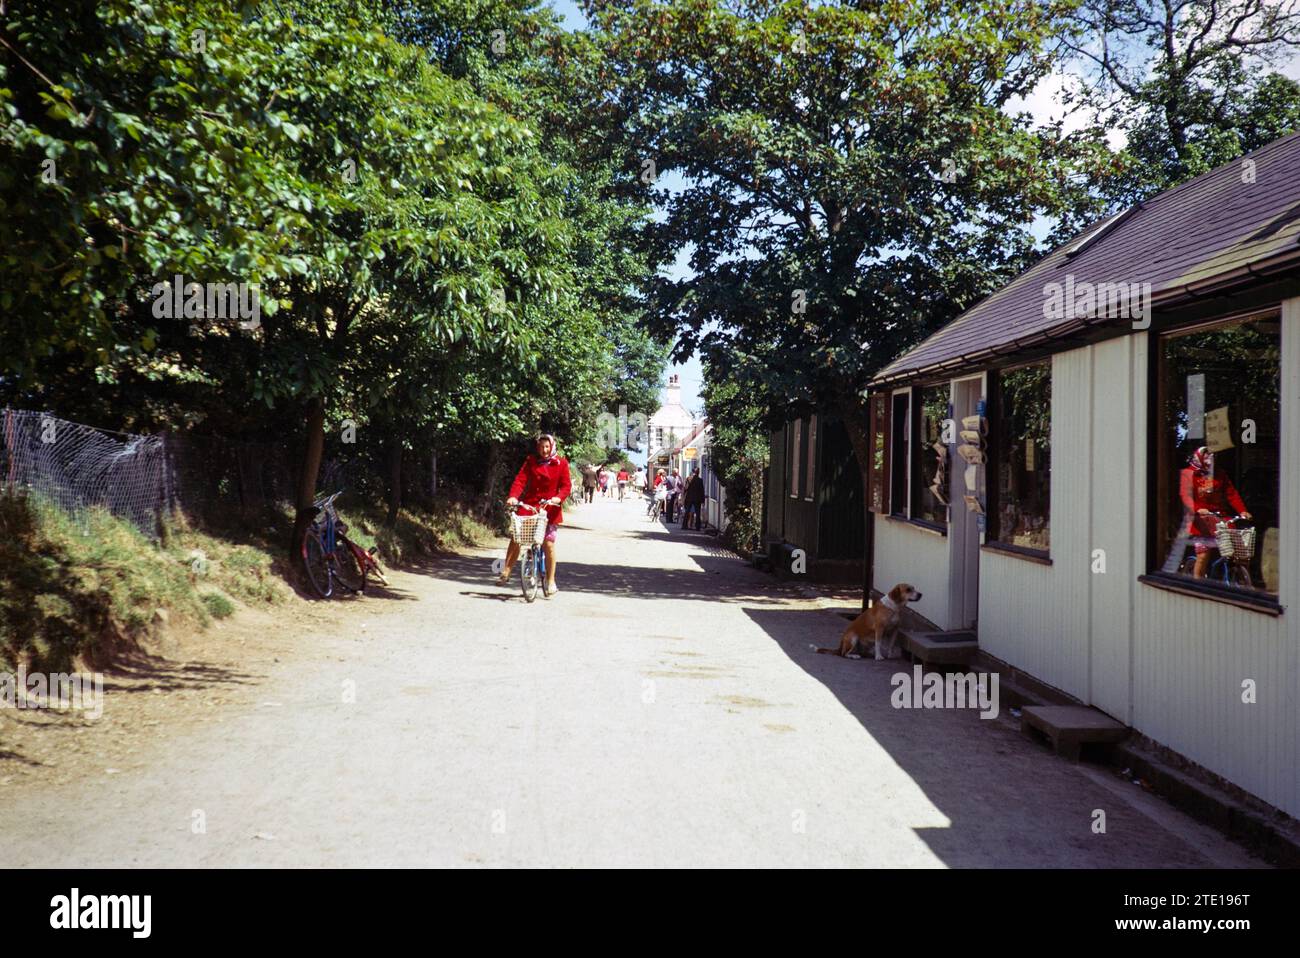 Woman cycling on main street of shops, Sark, Guernsey, Channel Islands, Great Britain, June 1974 Stock Photo